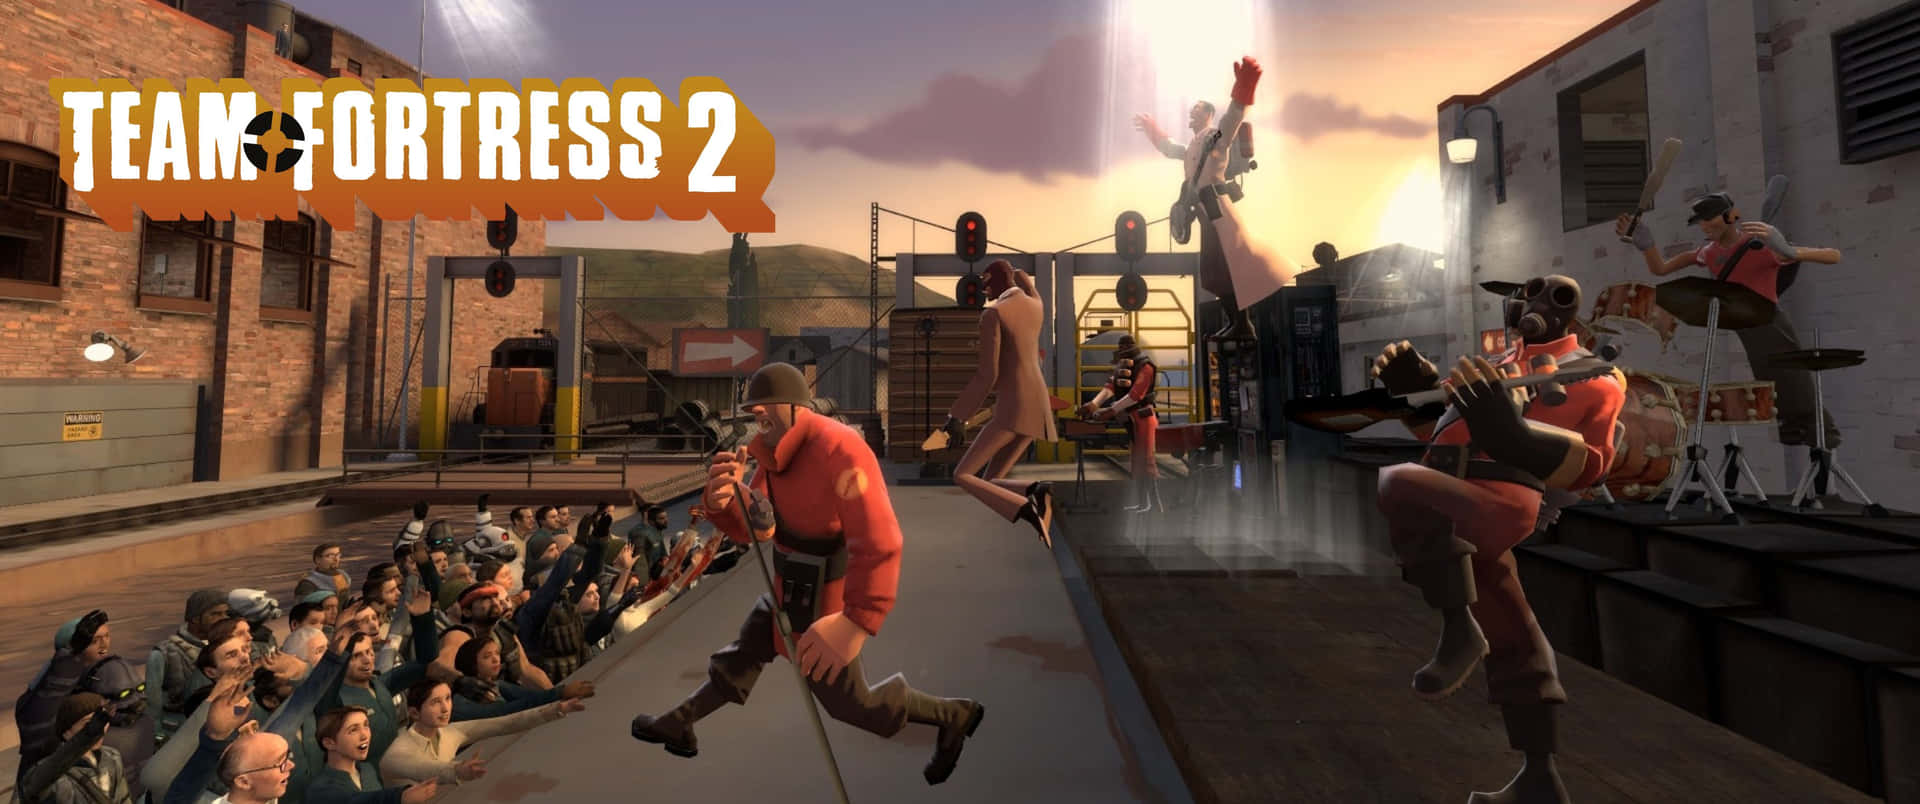 Play Team Fortress 2 in Ultra High Definition